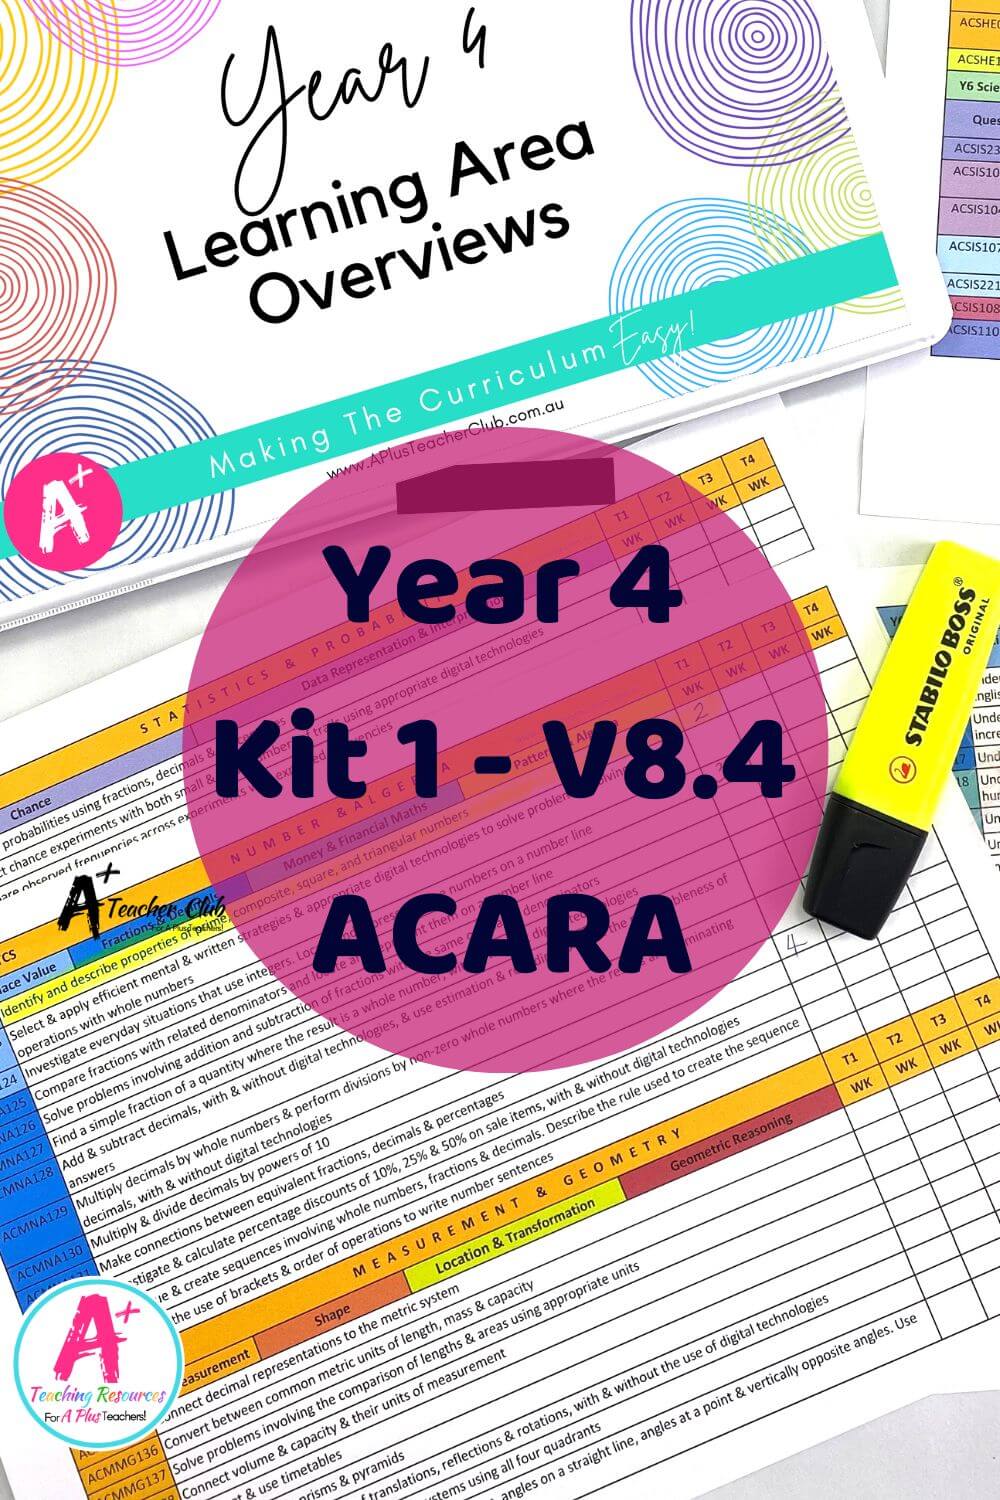 Year 4 Forward Planning Curriculum Overview ACARA V8.4